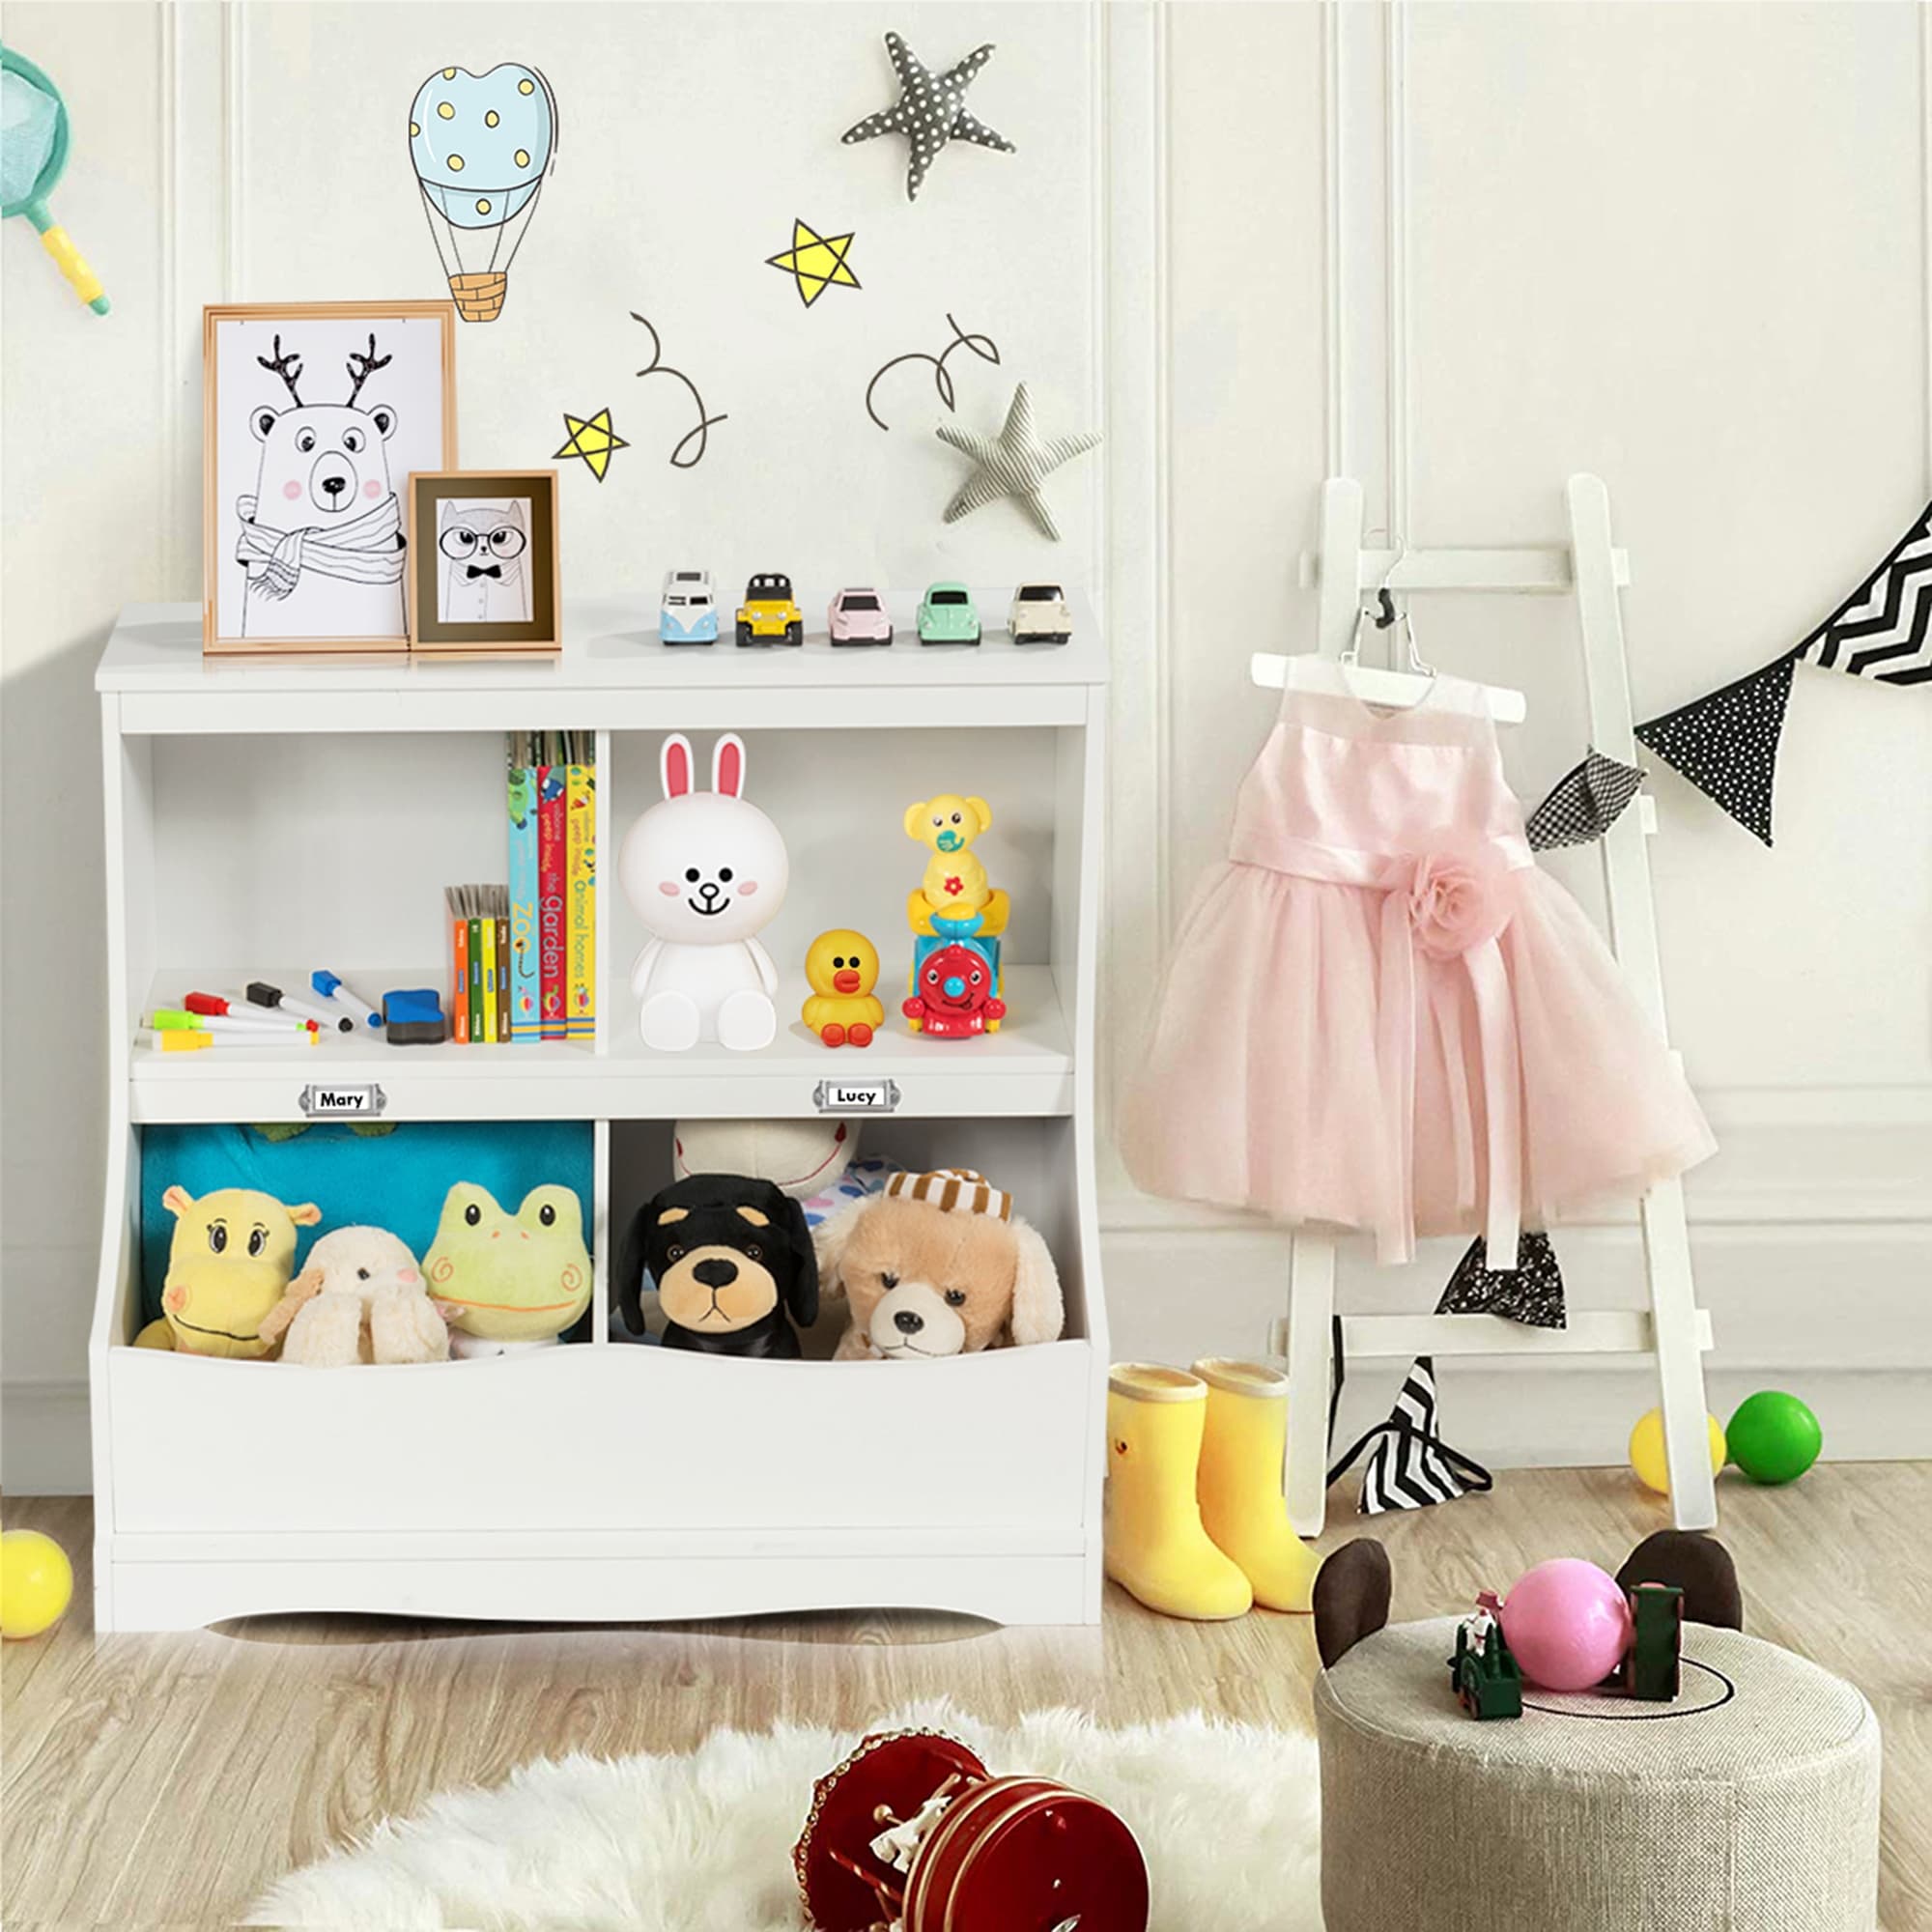 https://ak1.ostkcdn.com/images/products/is/images/direct/92e4bd494942ca4b0734fb812a3396a57a6bb76b/Costway-Children%27s-Multi-Functional-Bookcase-Toy-Storage-Bin-Kids.jpg